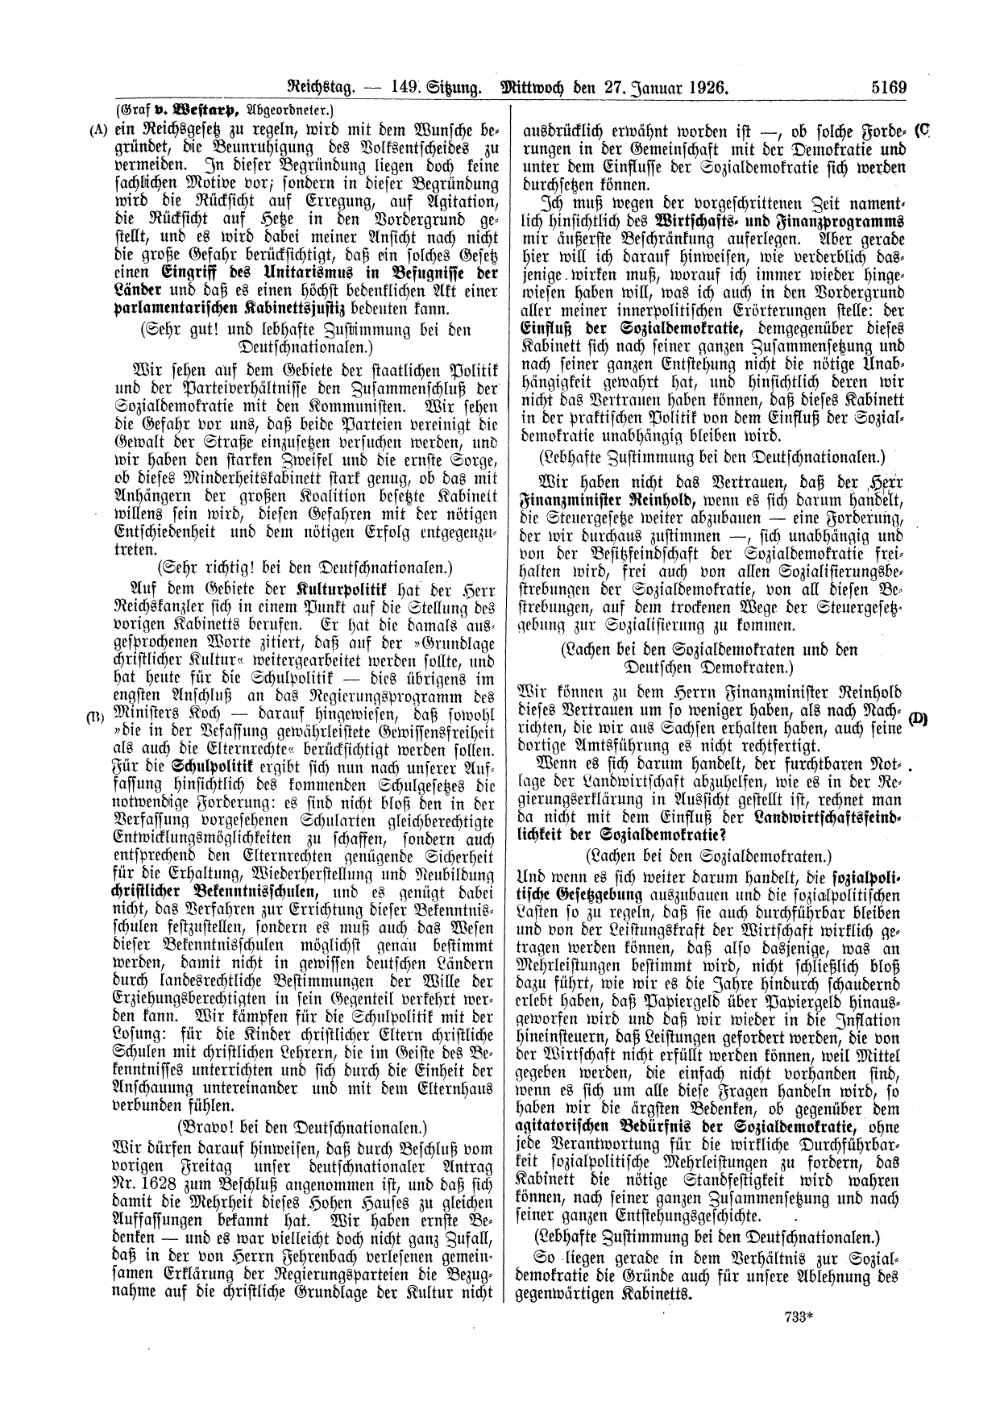 Scan of page 5169